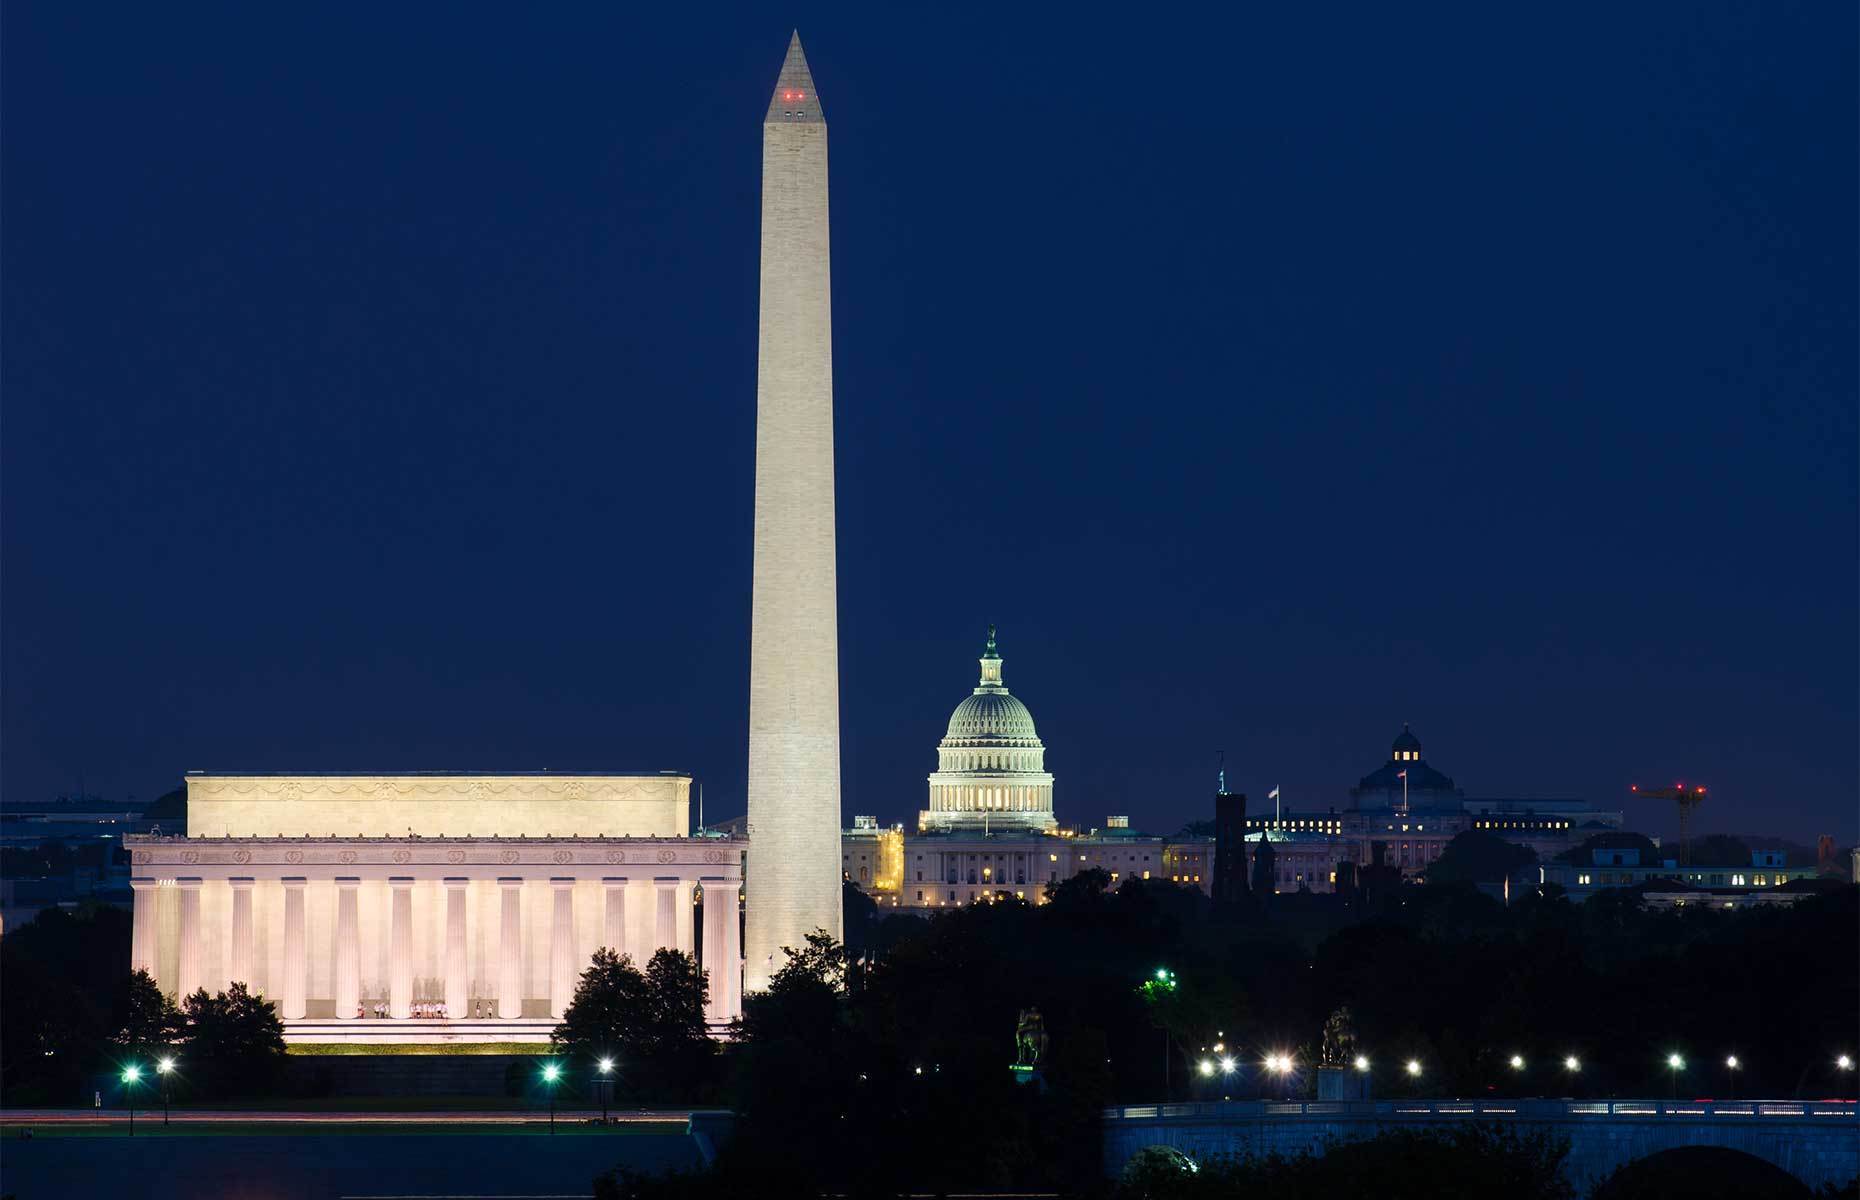 <p class="p1"><span>Washington is the seat of political power in the United States and offers numerous sightseeing possibilities, such as the <a href="https://washington.org/find-dc-listings/white-house-visitor-center" rel="noreferrer noopener"><span>White House</span></a>, <a href="https://washington.org/dc-neighborhoods/capitol-hill" rel="noreferrer noopener"><span>Capitol Hill</span></a>, the <a href="https://washington.org/find-dc-listings/washington-monument" rel="noreferrer noopener"><span>Washington Monument</span></a>, and <a href="https://washington.org/find-dc-listings/museums" rel="noreferrer noopener"><span>several museums</span></a>. Make the most of every minute by opting for <a href="https://www.getyourguide.com/-l62/?cmp=ga&campaign_id=167246500&adgroup_id=10617318220&target_id=kwd-98837460820&loc_physical_ms=9000555&match_type=e&ad_id=377847783574&keyword=quoi+faire+washington+dc&ad_position=1t1&feed_item_id=&placement=&partner_id=CD951&gclid=EAIaIQobChMIm77E0bSZ5QIVzZ-zCh0uSwUiEAAYASAAEgJ1o_D_BwE&utm_force=0" rel="noreferrer noopener"><span>guided evening tours</span></a>.</span></p>